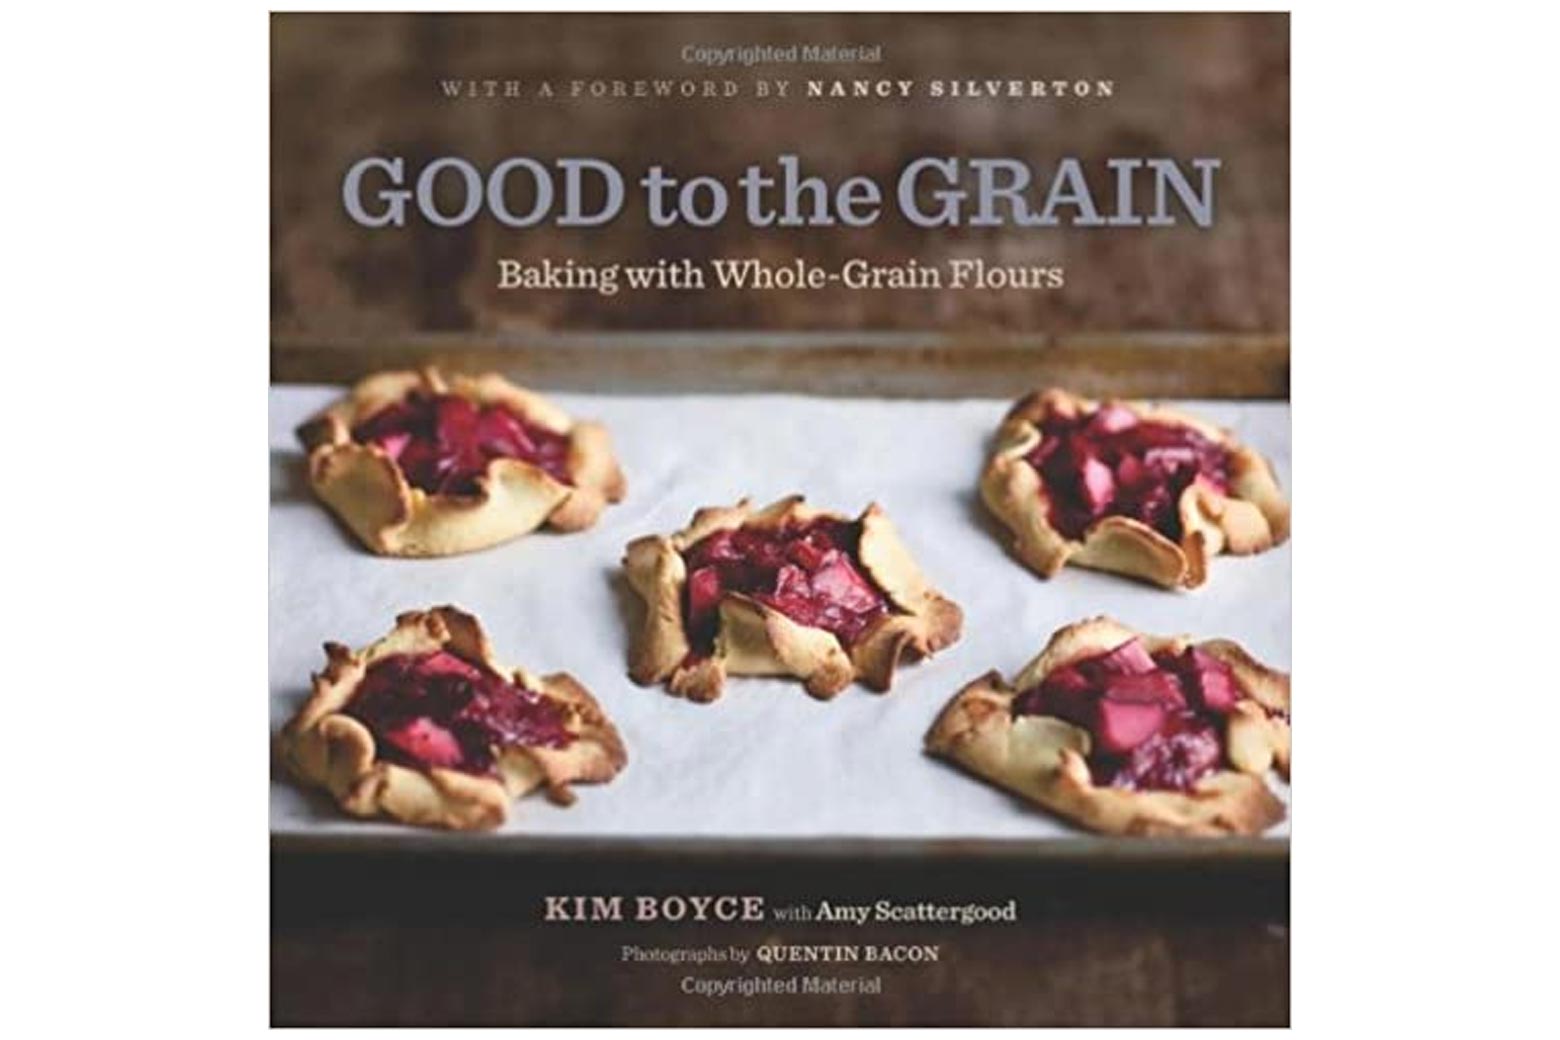 Good to the Grain book cover